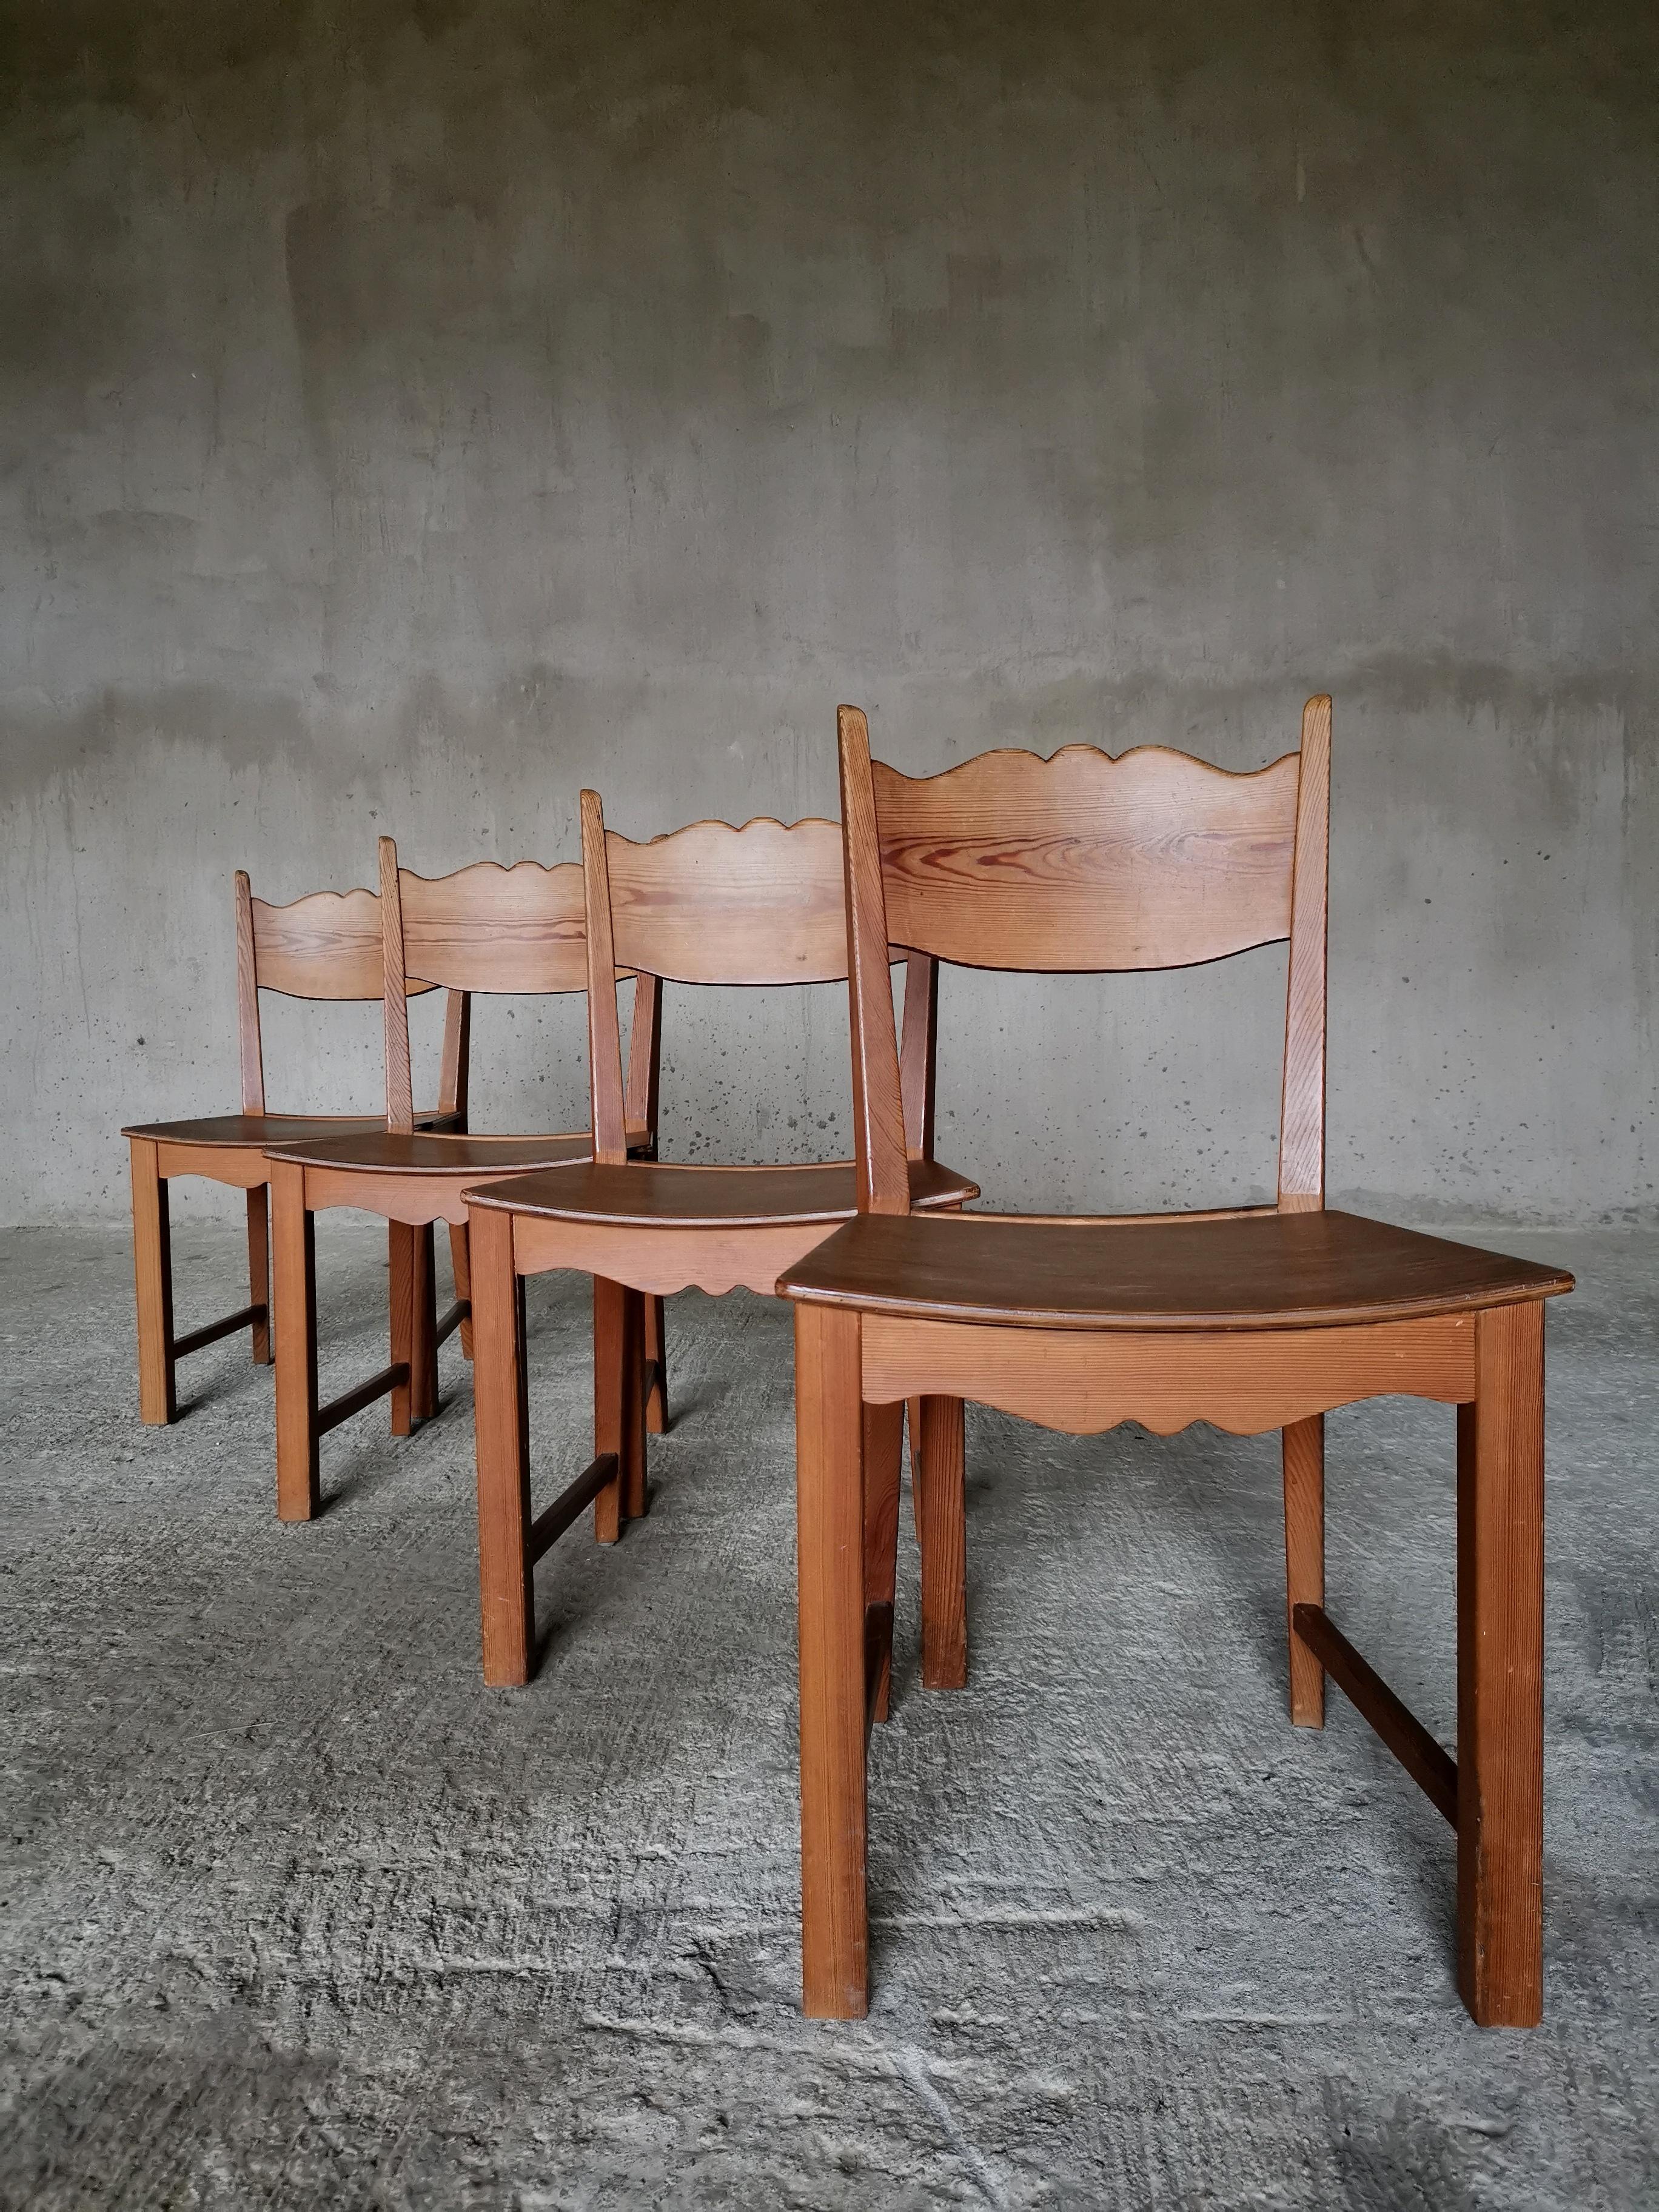 Set of 4 Swedish 1930s dining chairs in solid pine, style of Axel Einar Hjorth  For Sale 2